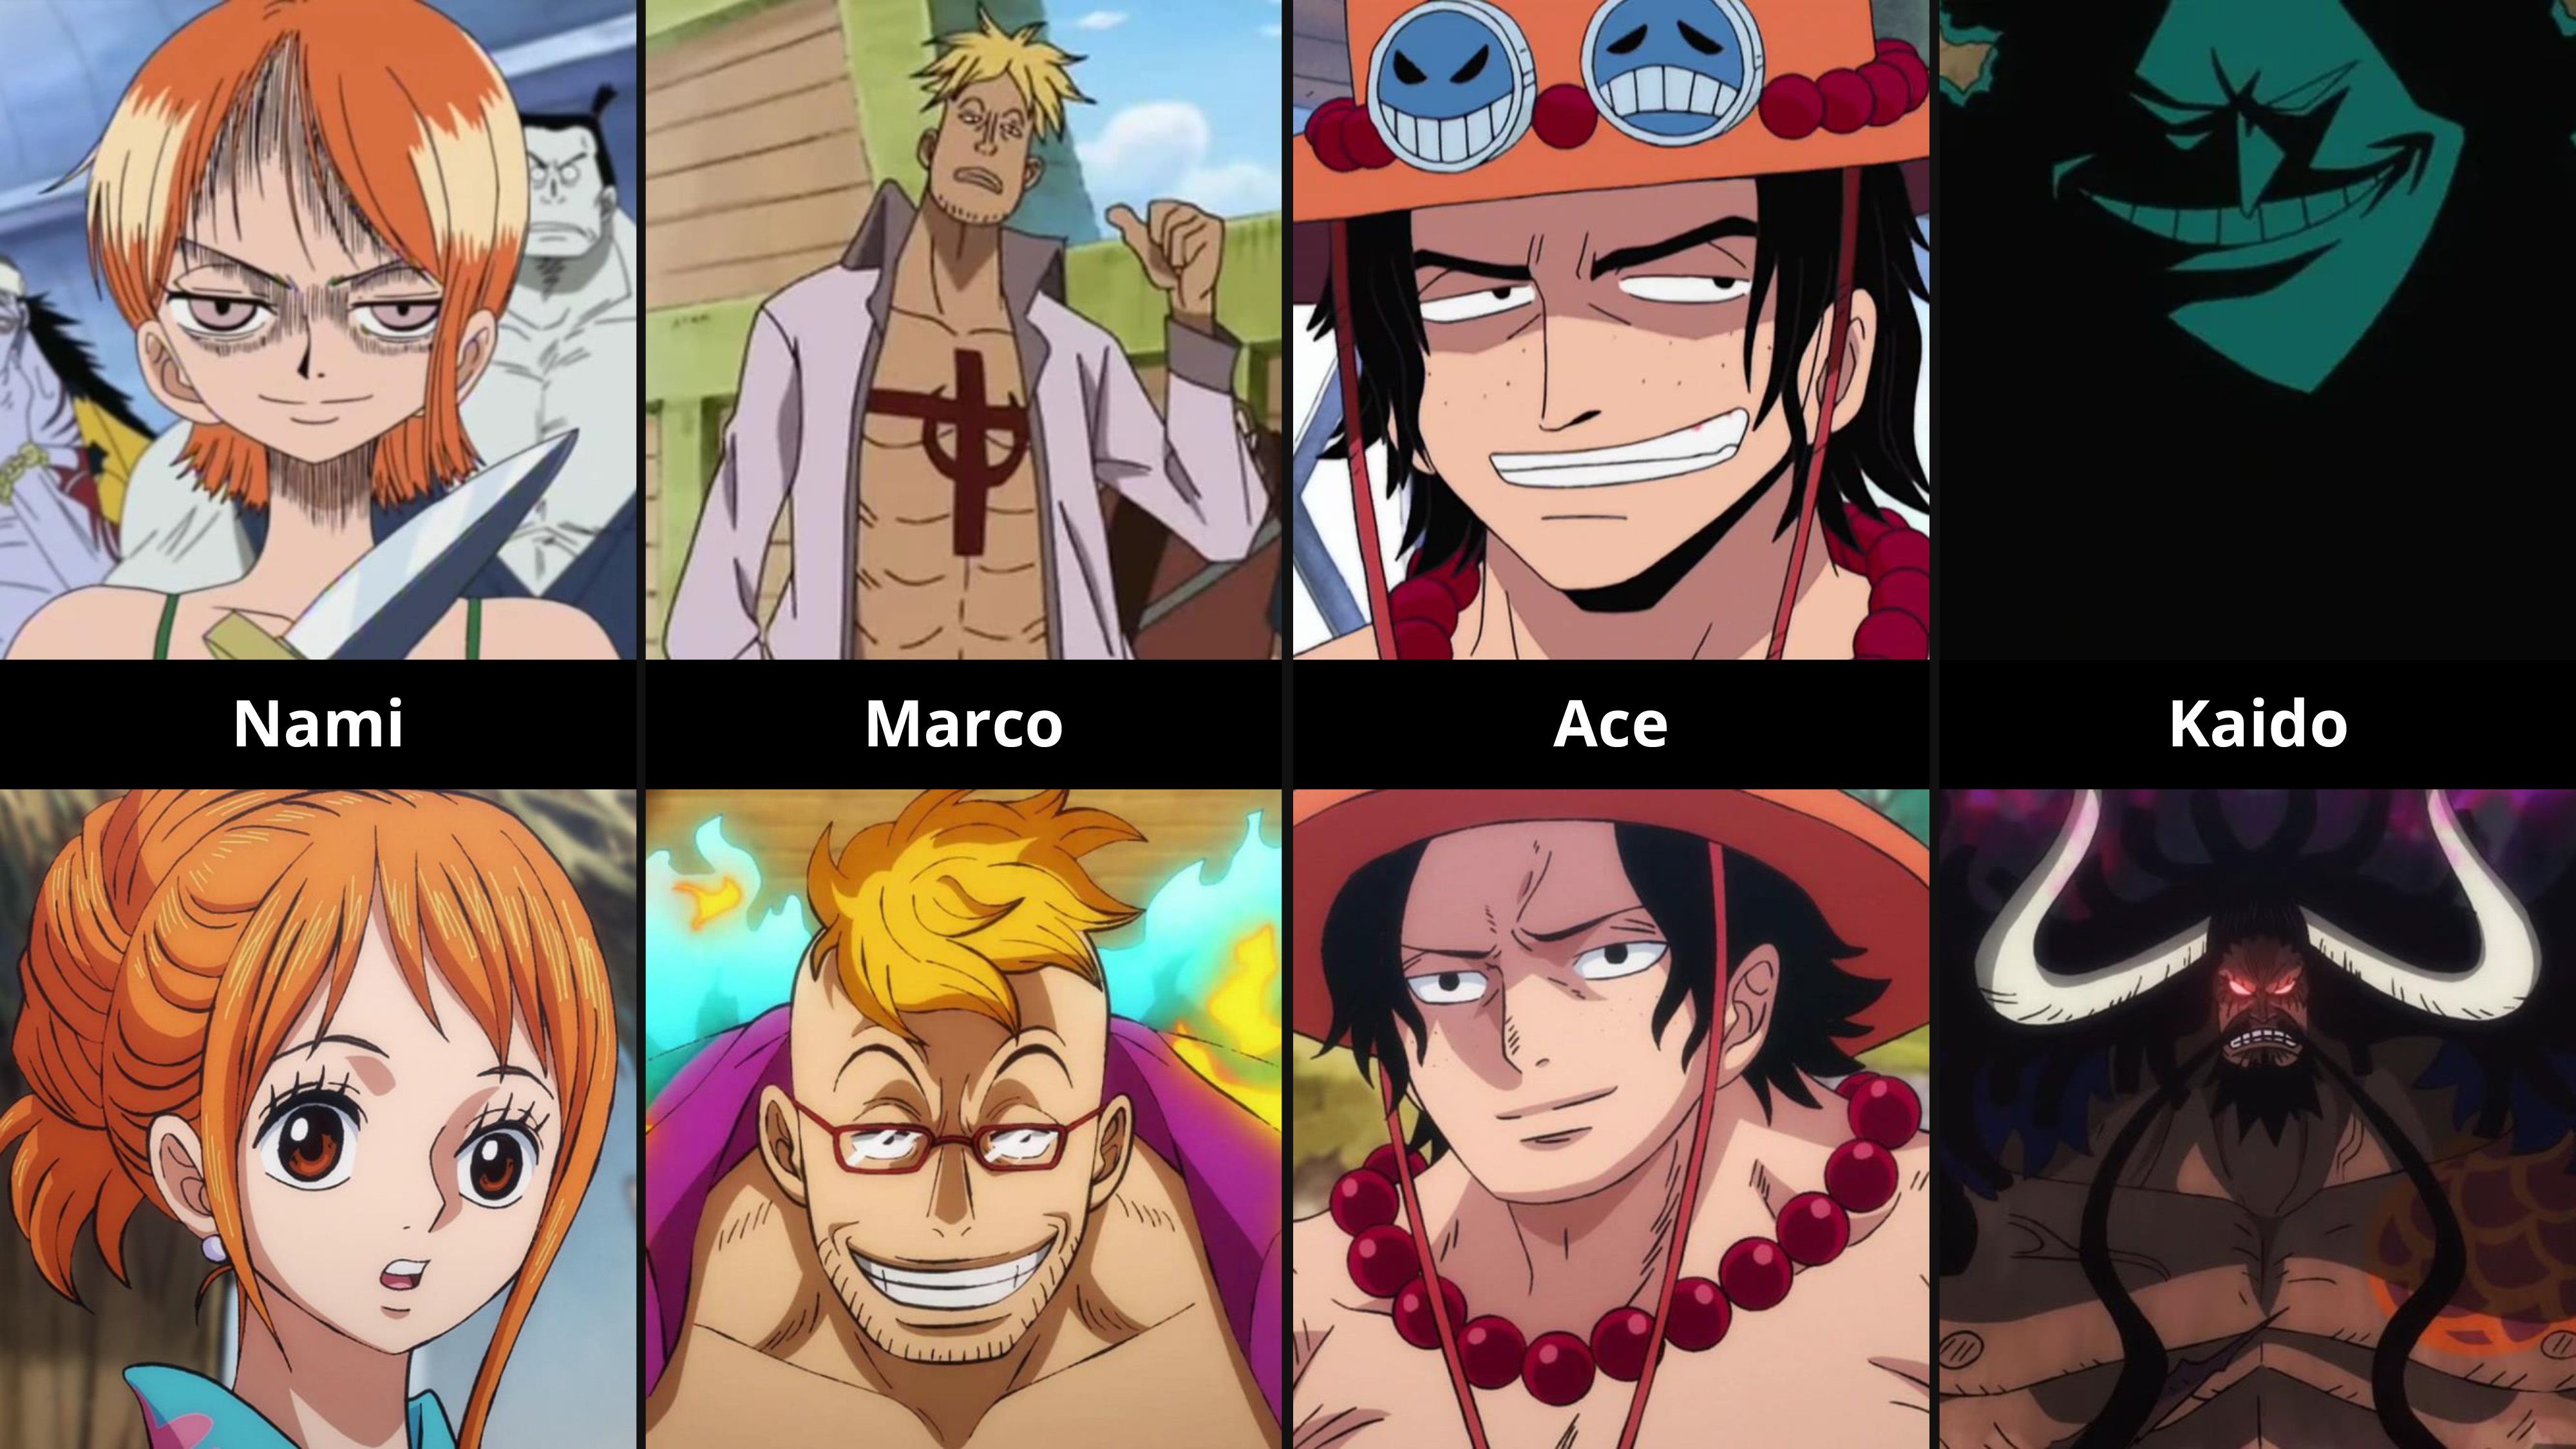 Age of One Piece Characters - BiliBili